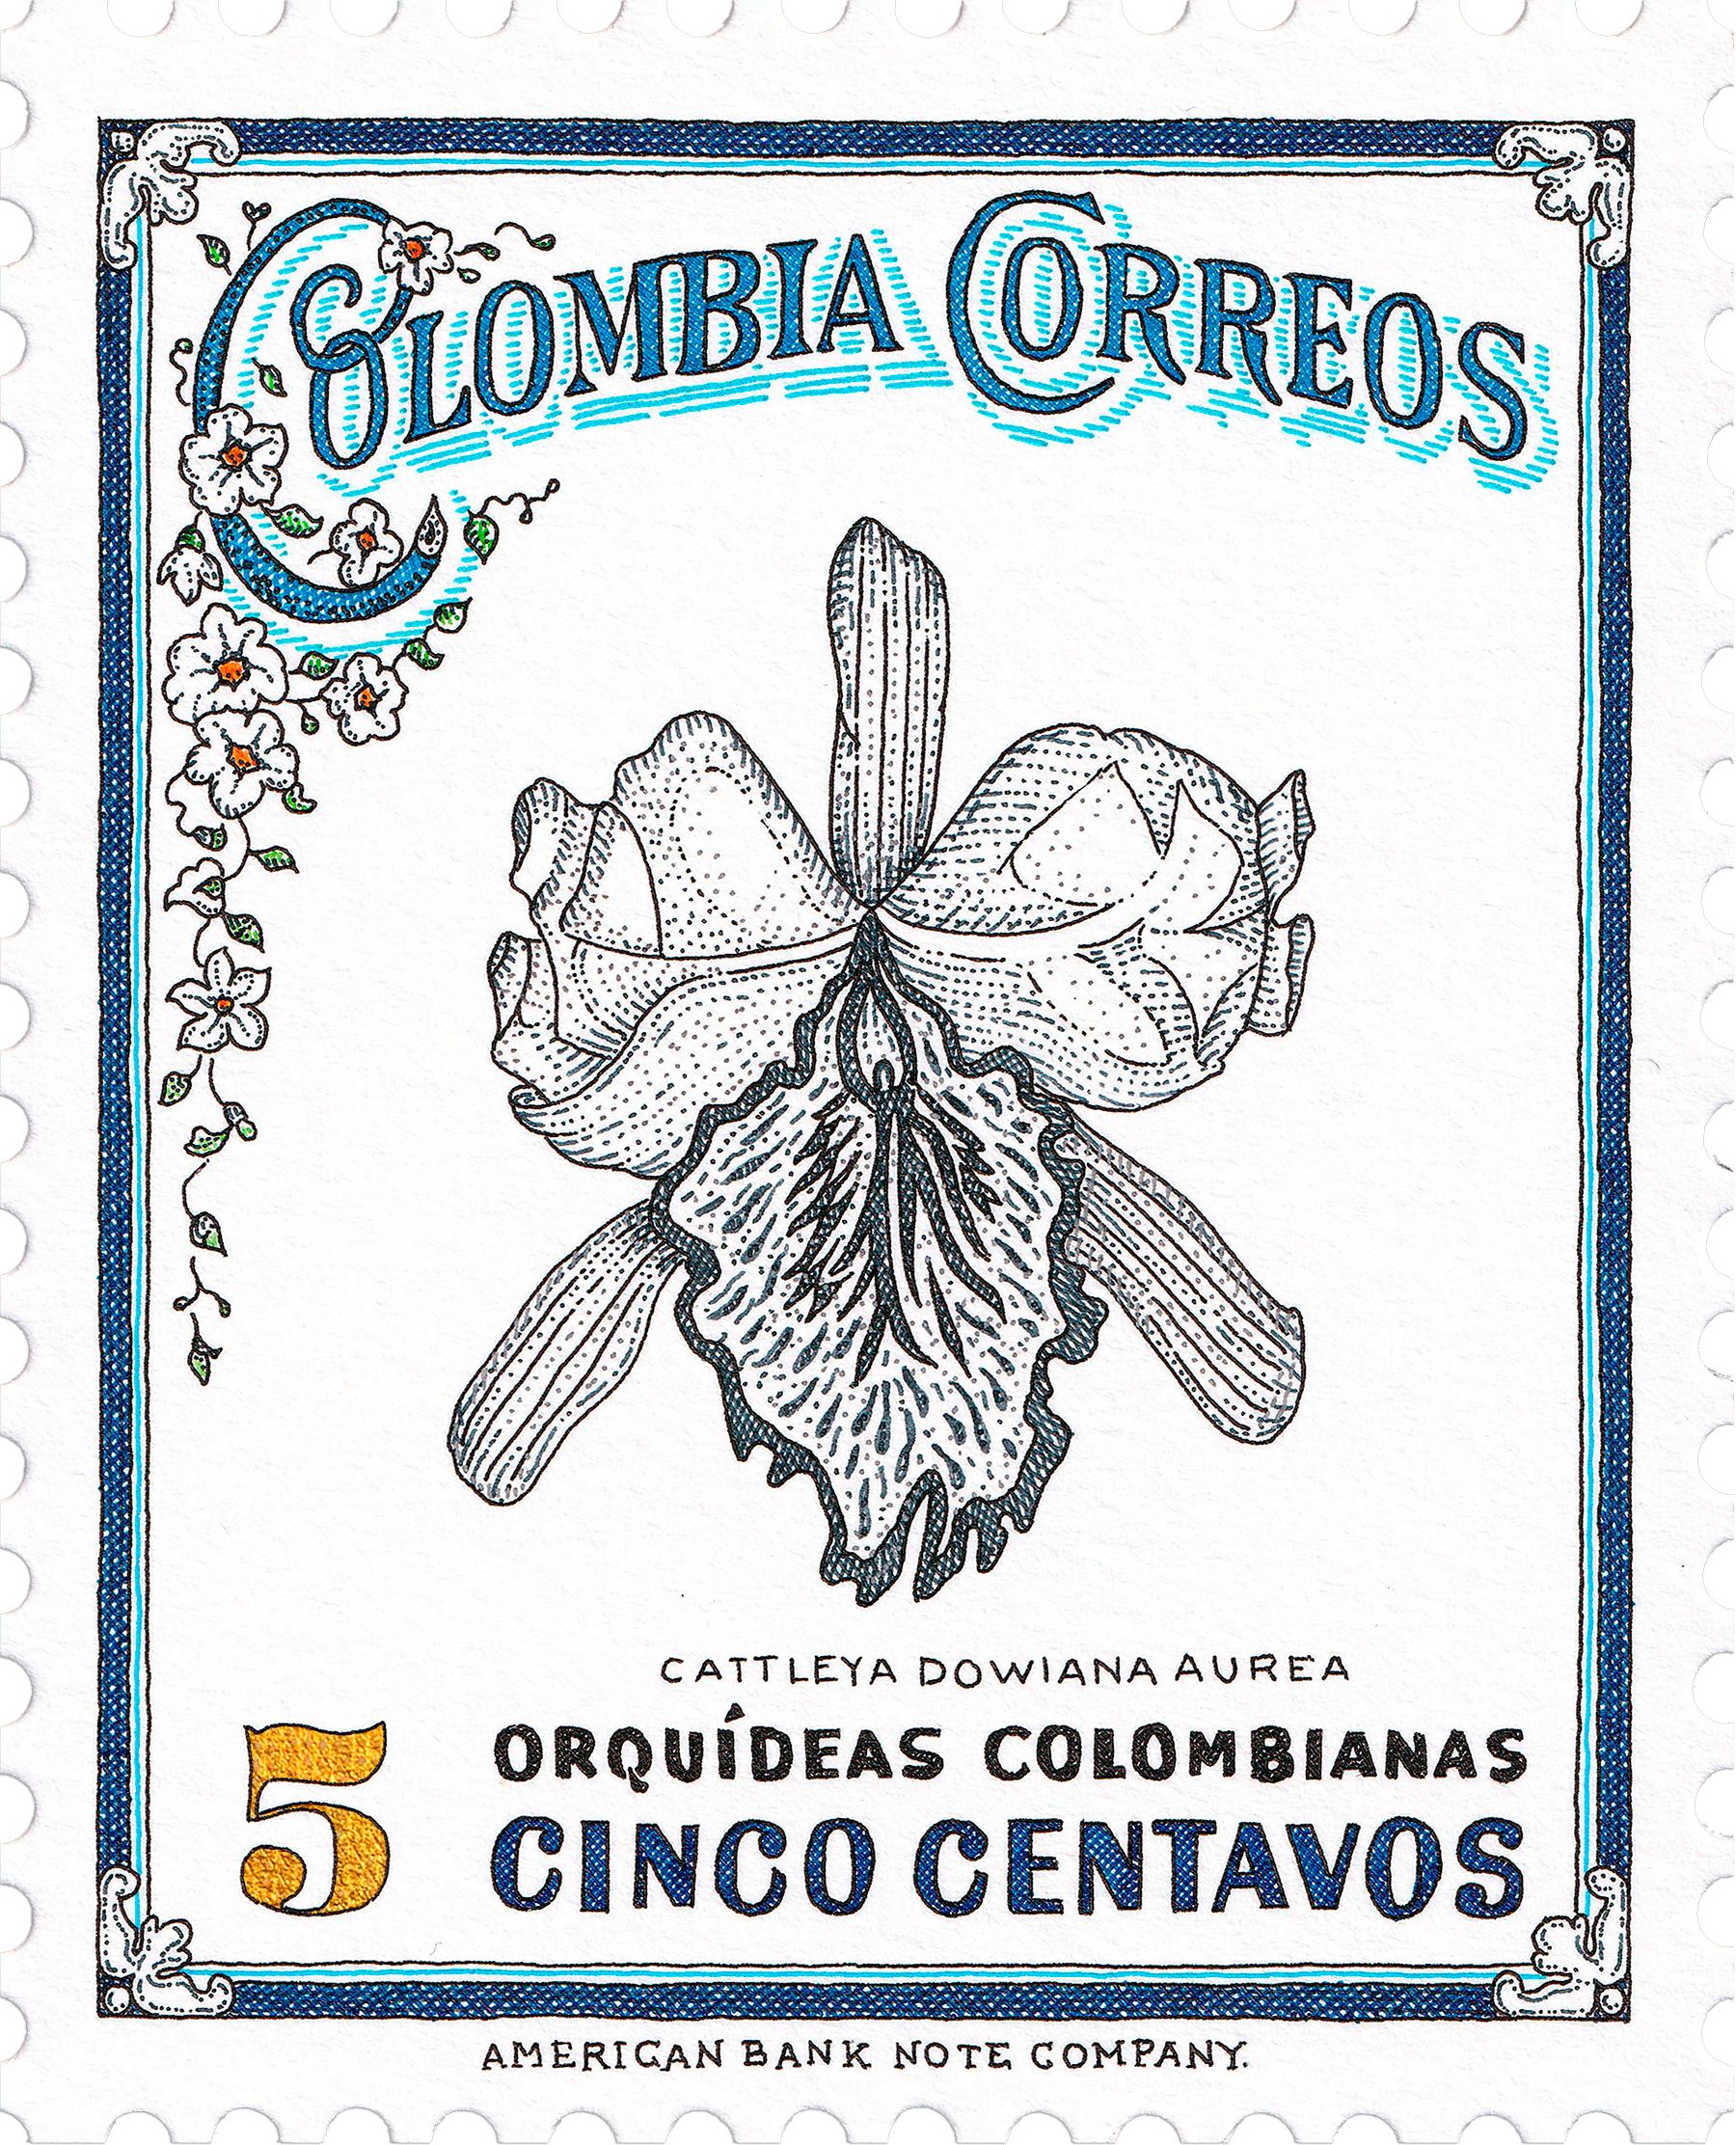 Set of 6 Orquídeas. From The Terms and conditions series, Still life drawing - Print by Rodrigo Spinel 